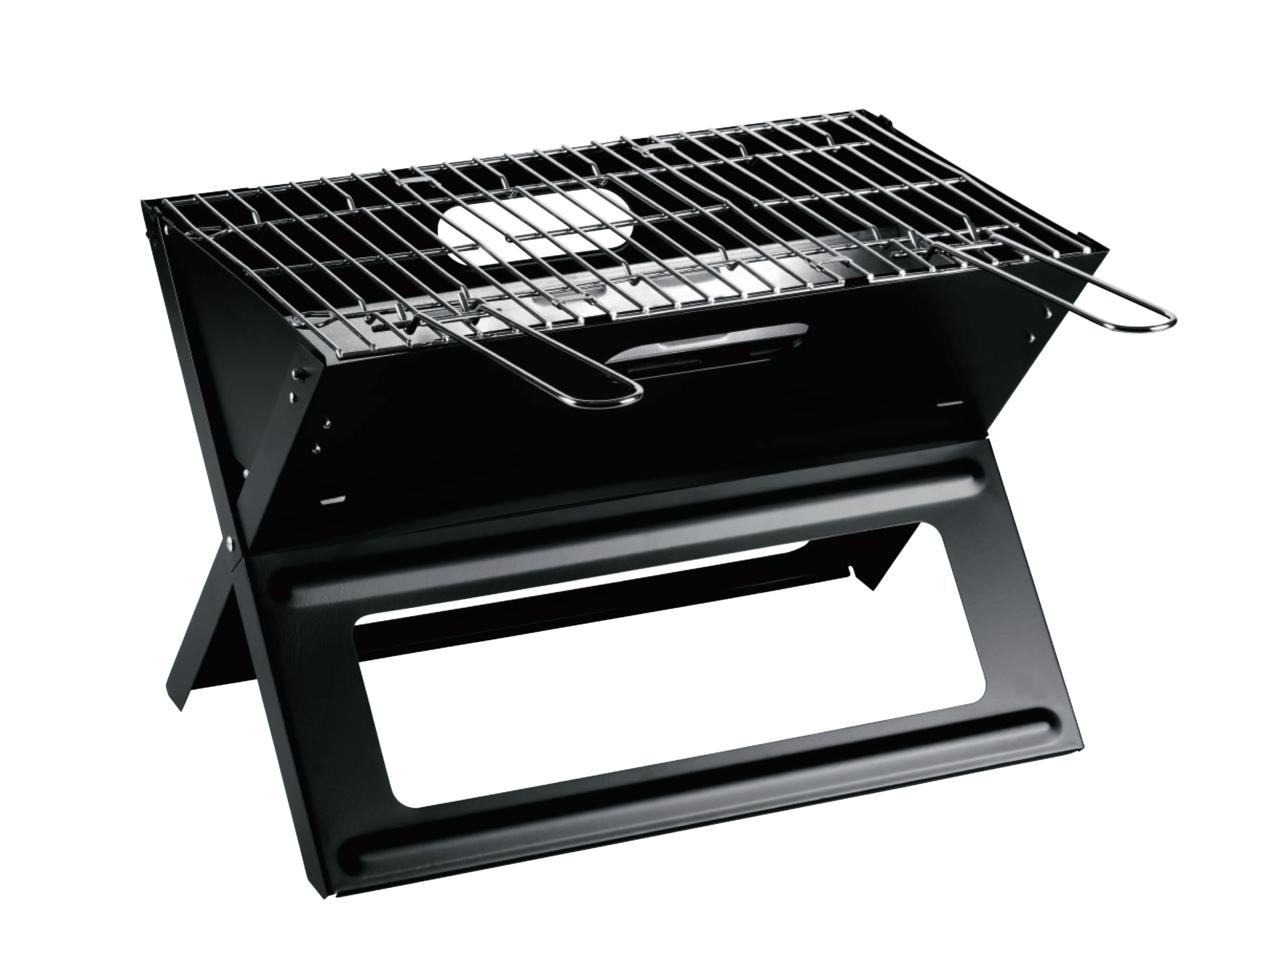 FLORABEST Folding Barbecue